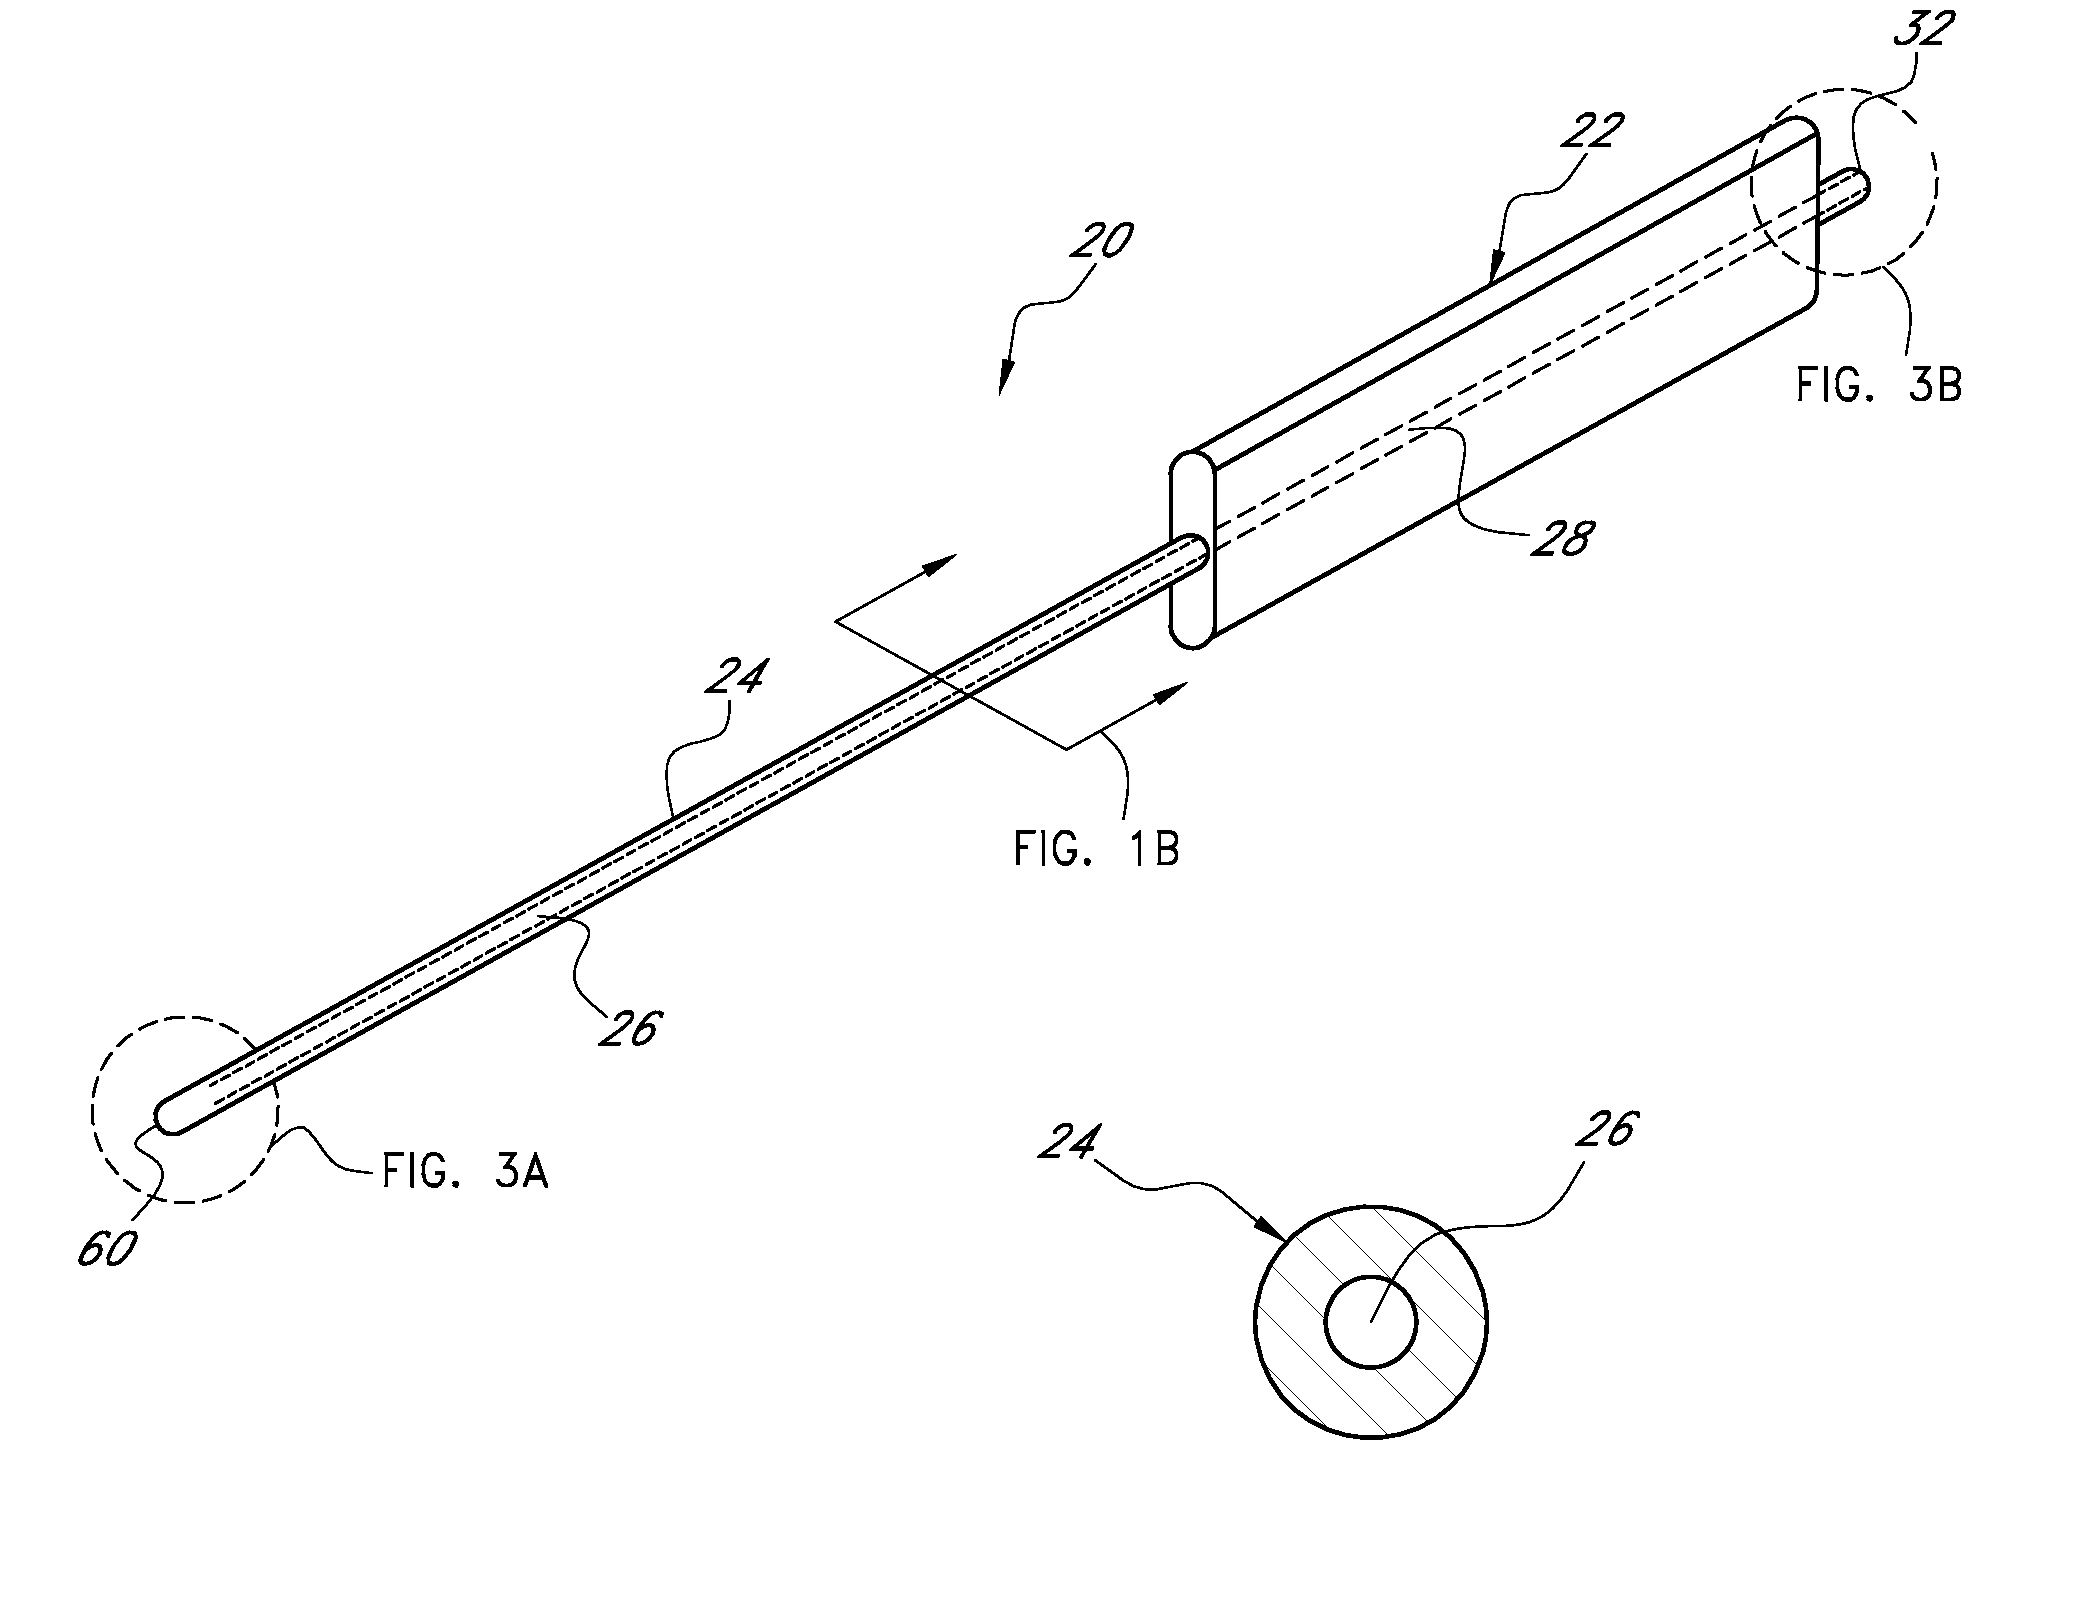 Soft tissue tunneling device